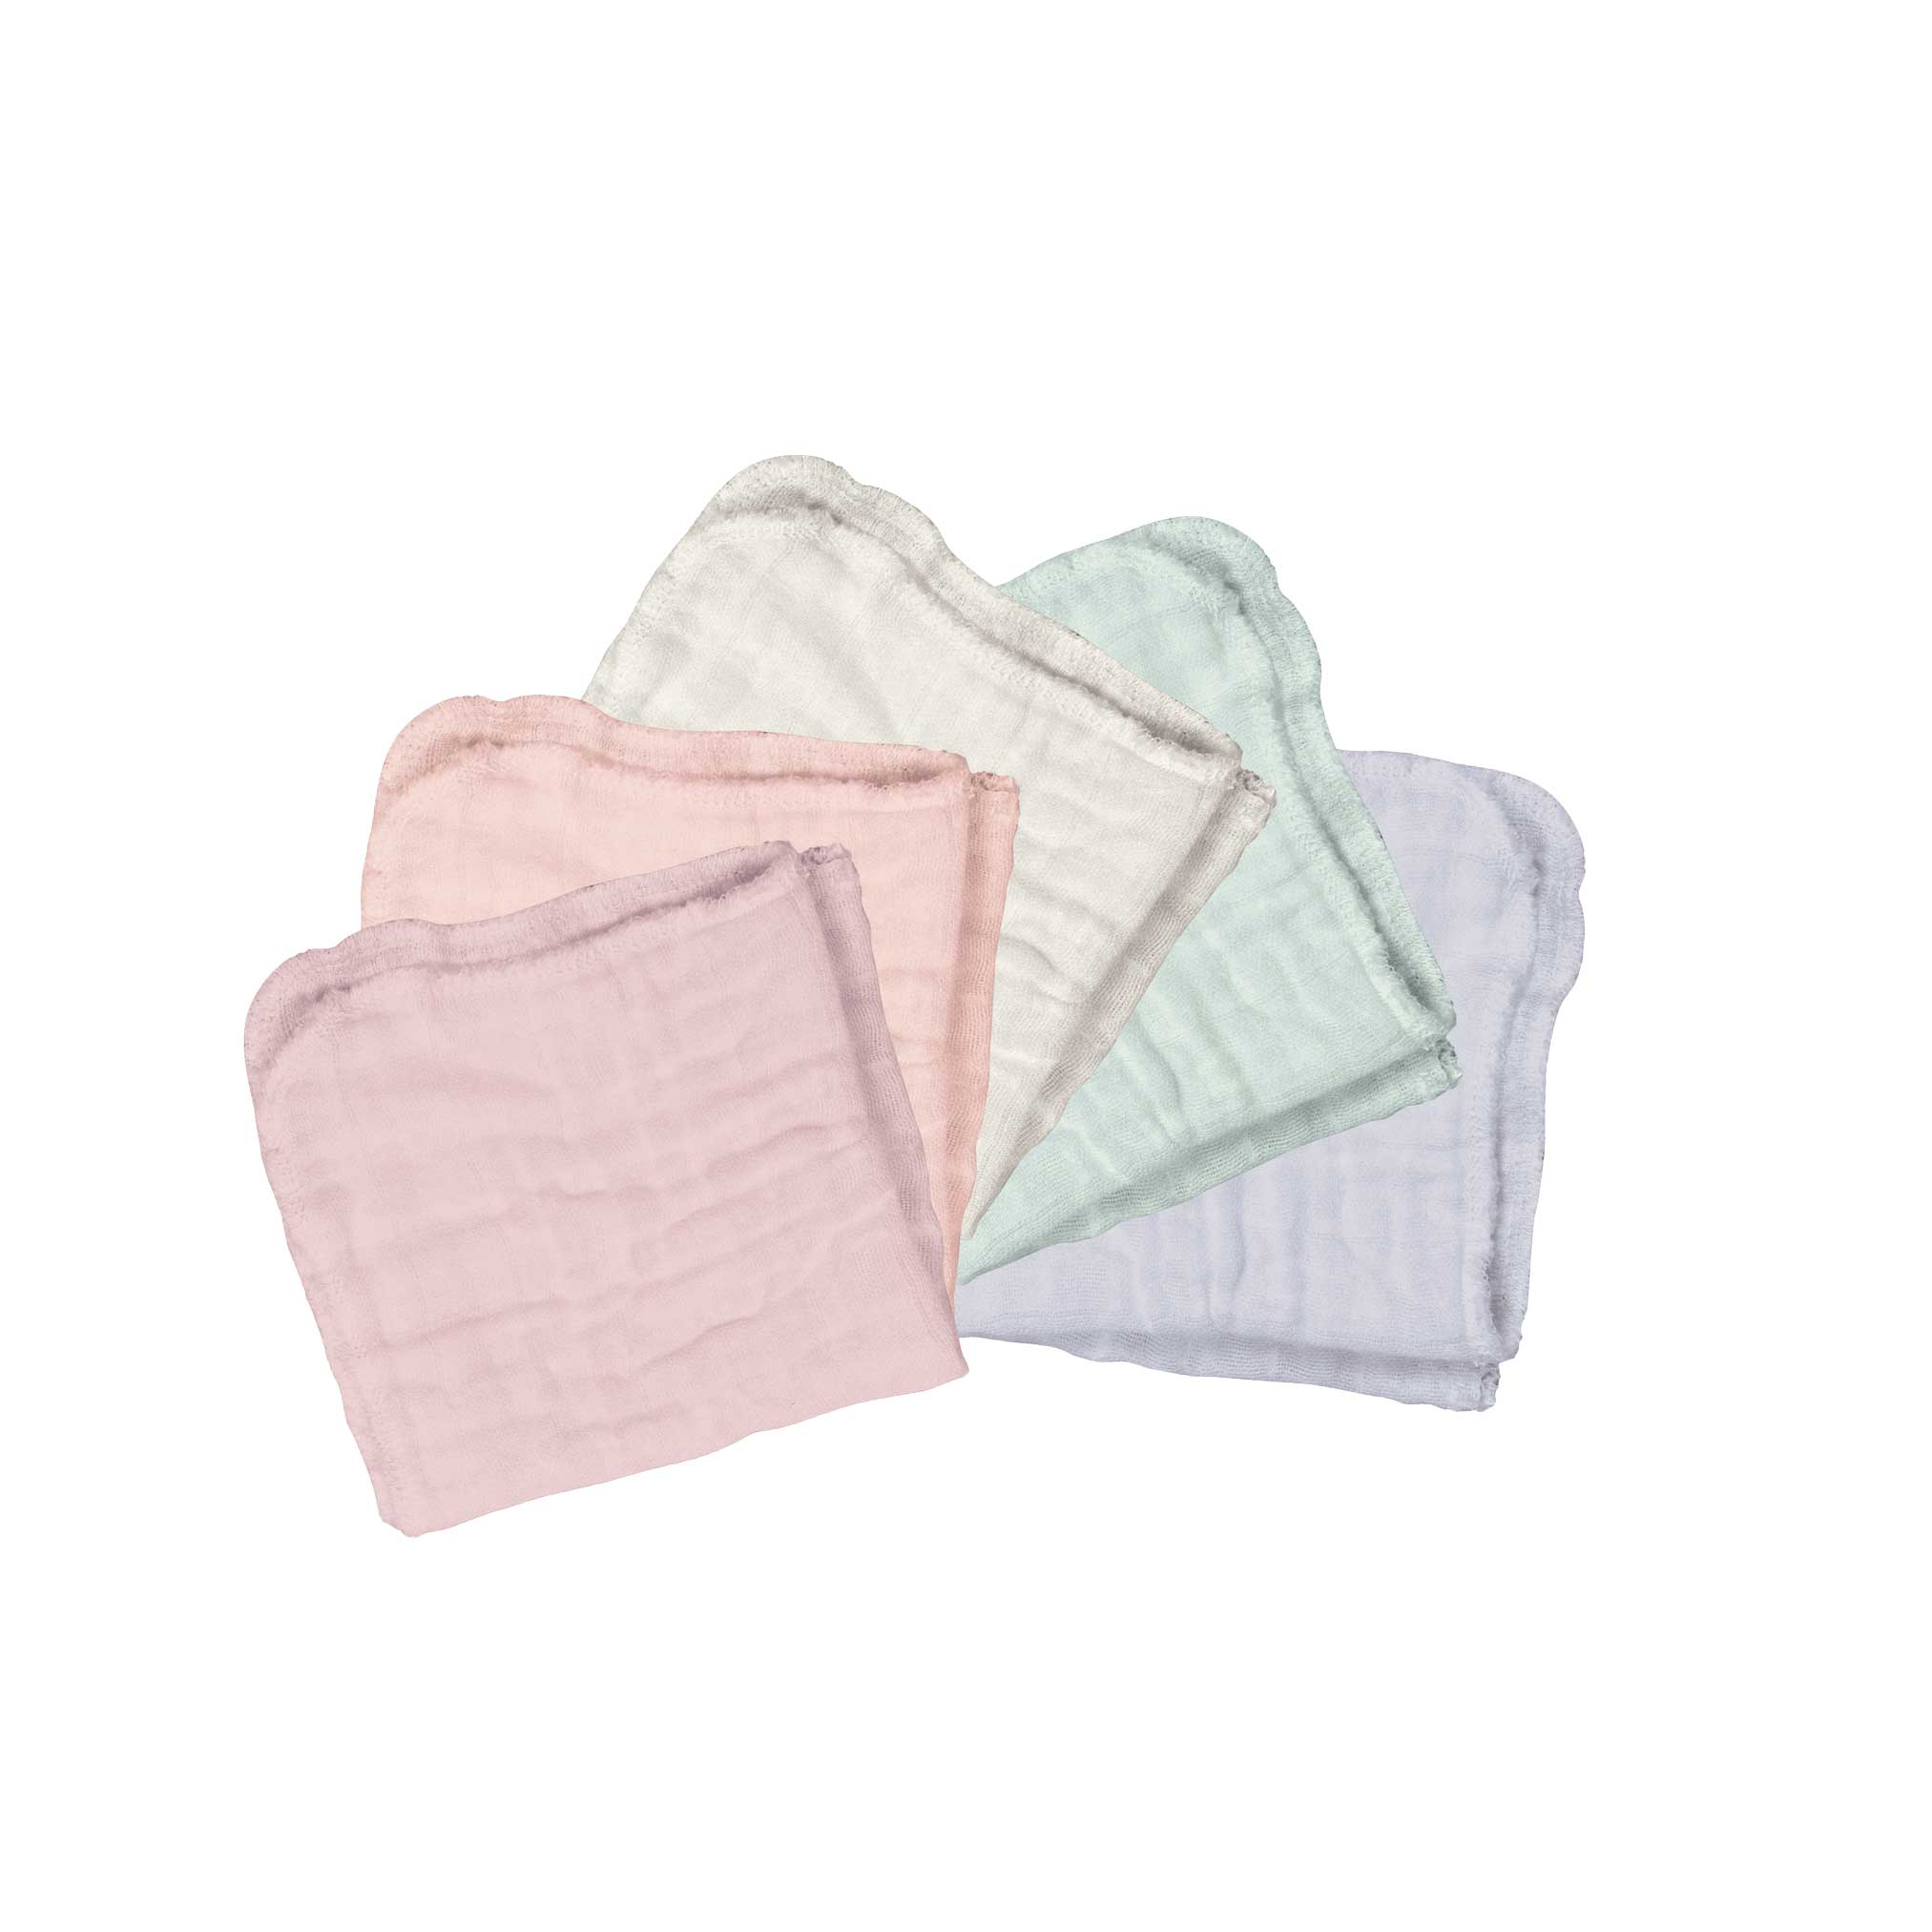 green sprouts® Reusable Baby Wipes made from Organic Cotton (5 pack)